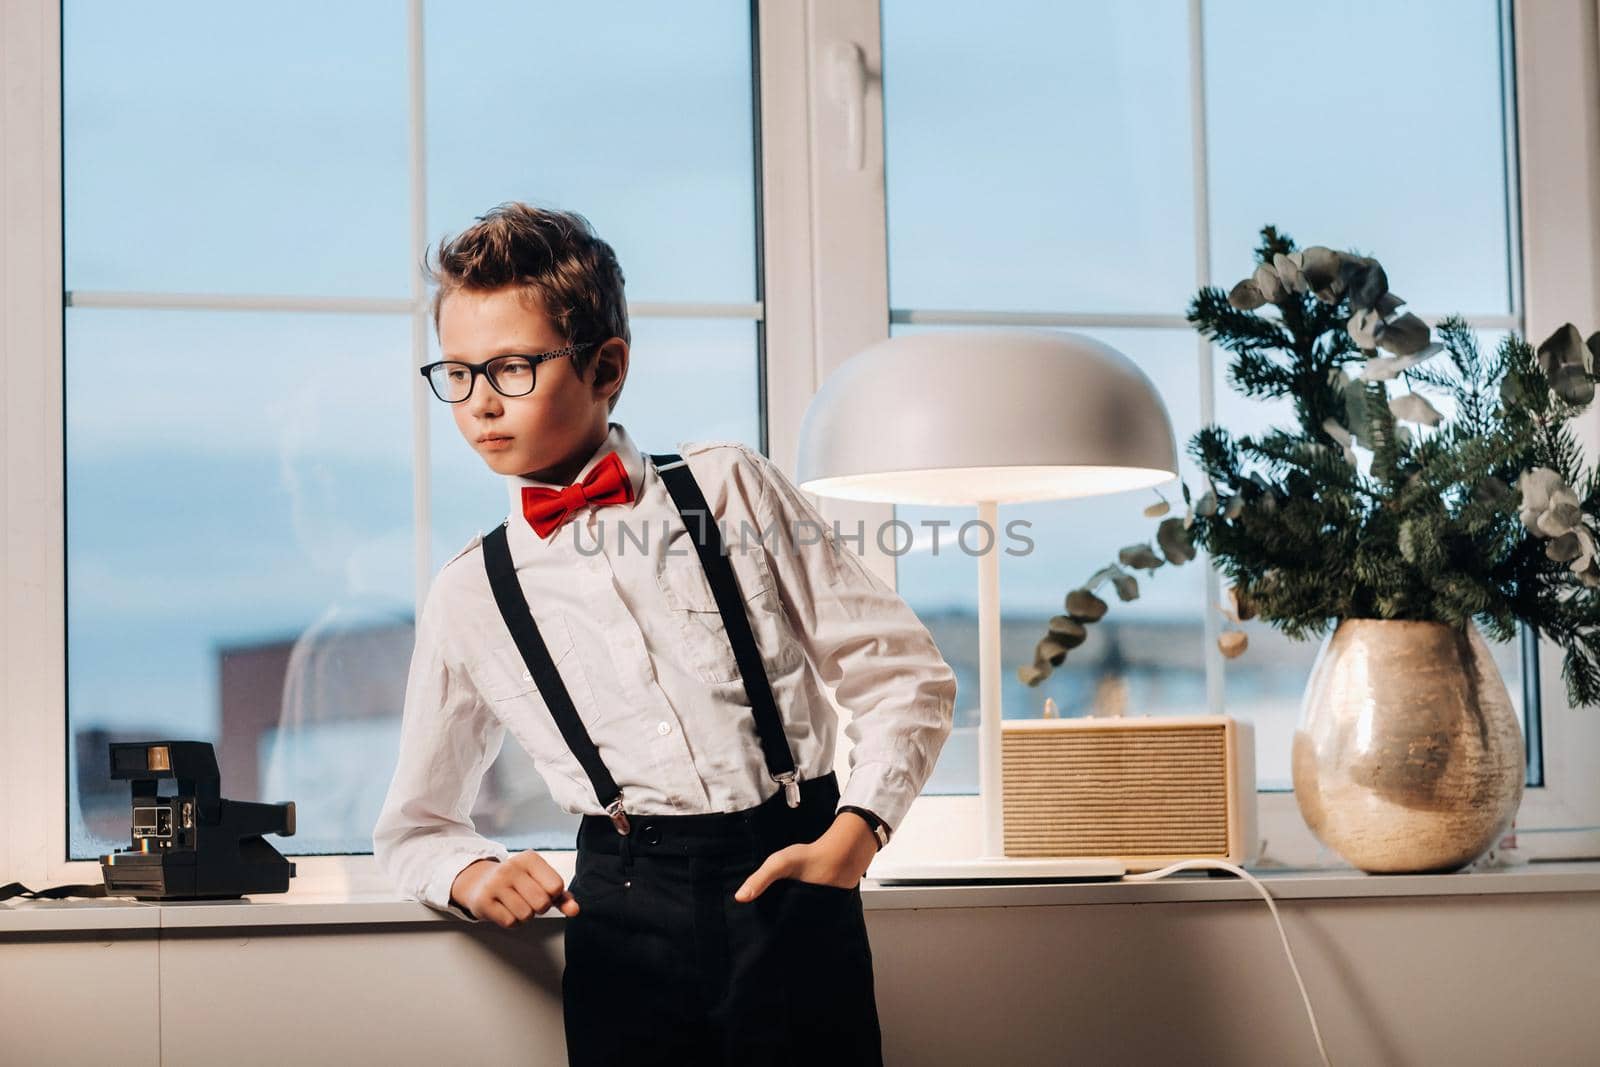 A boy in a shirt with a red bow tie and glasses stands at the window